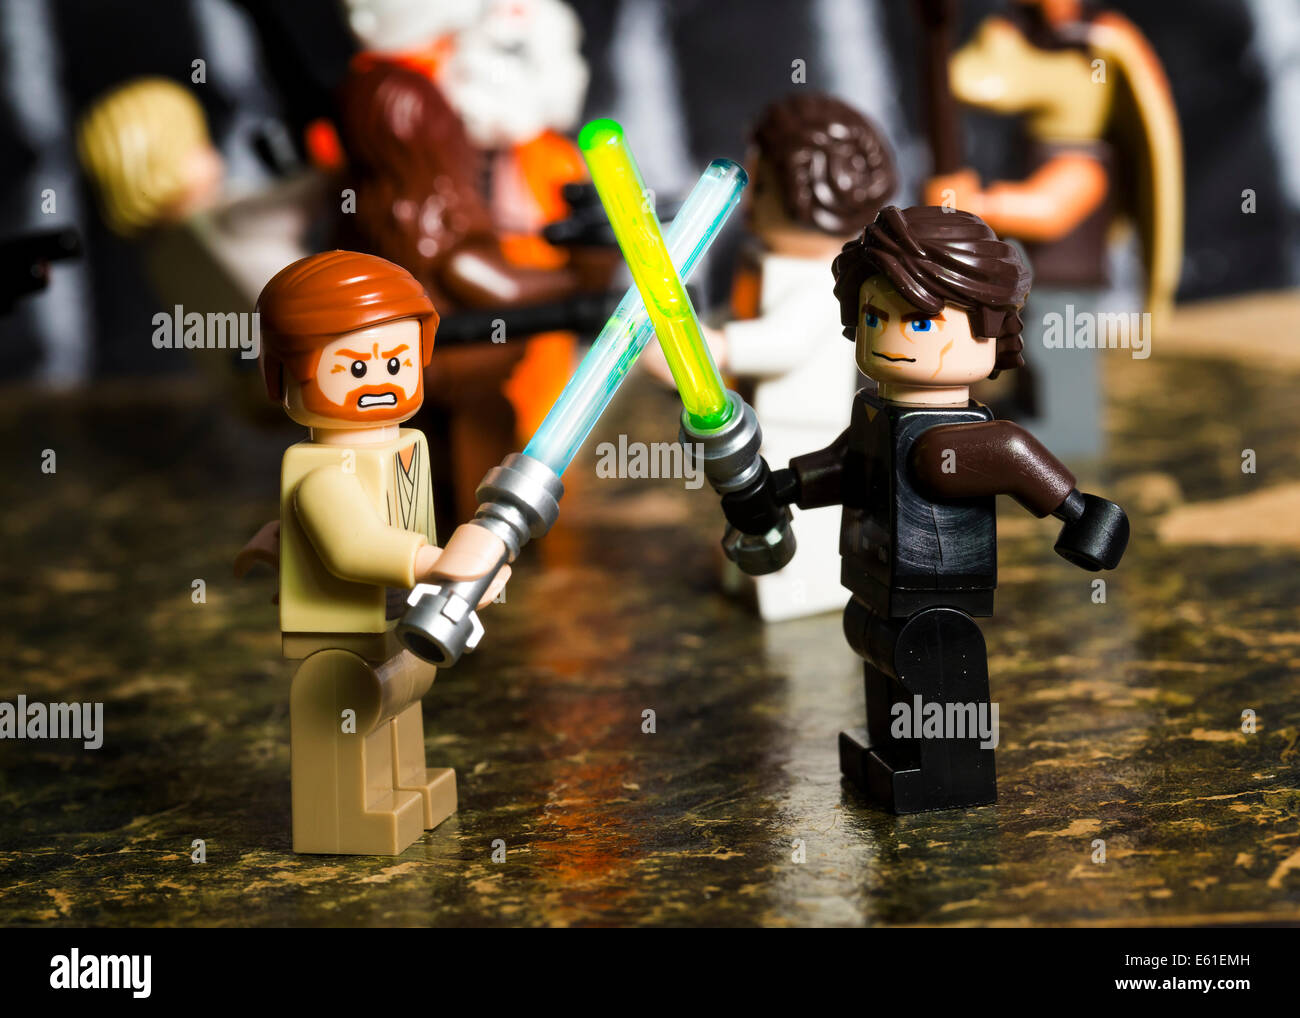 Lego Star Wars figures of Obi Wan Kenobi and Anakin Skywalker facing each other with lightsabers. other figures behind Stock Photo